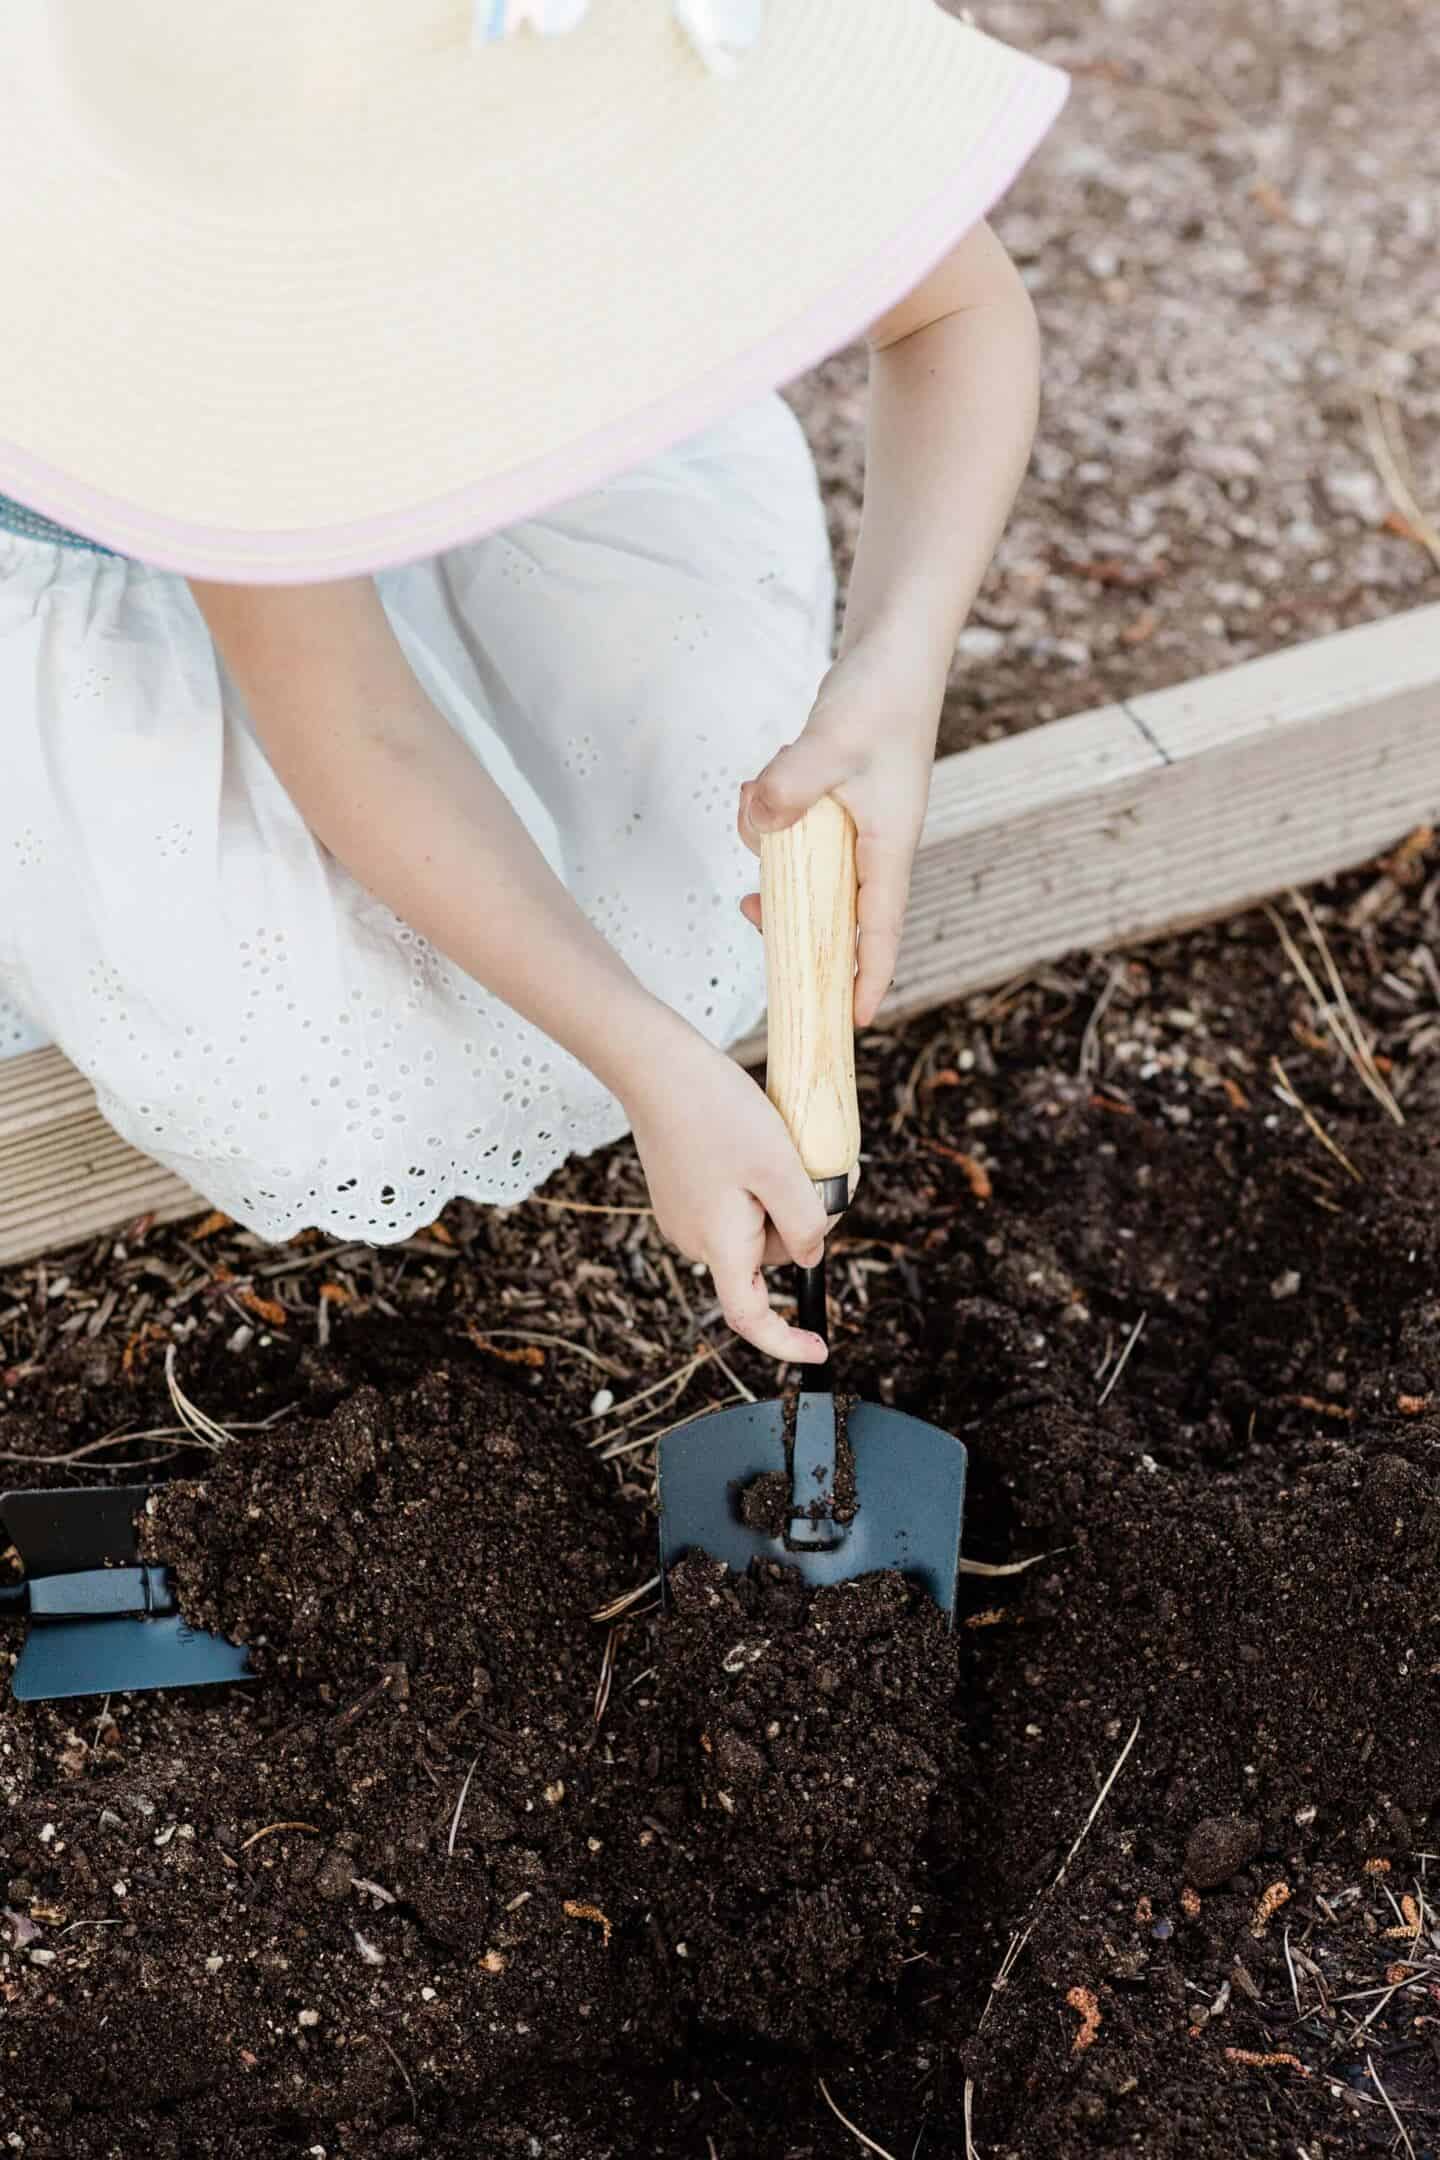 A young girl in a white Broderie Anglaise dress digs in some garden soil with a trowl